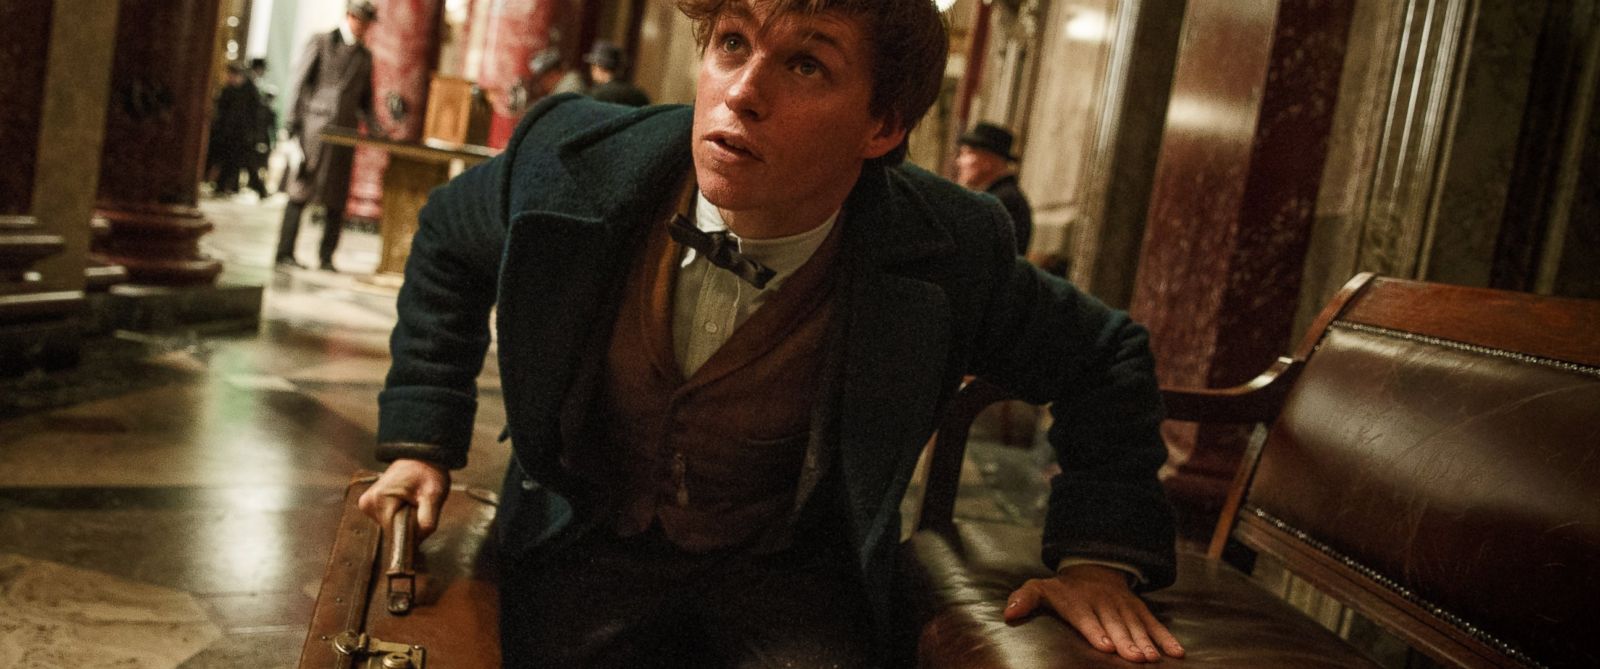 Fantastic Beasts And Where To Find Them Film Online Watch 2016